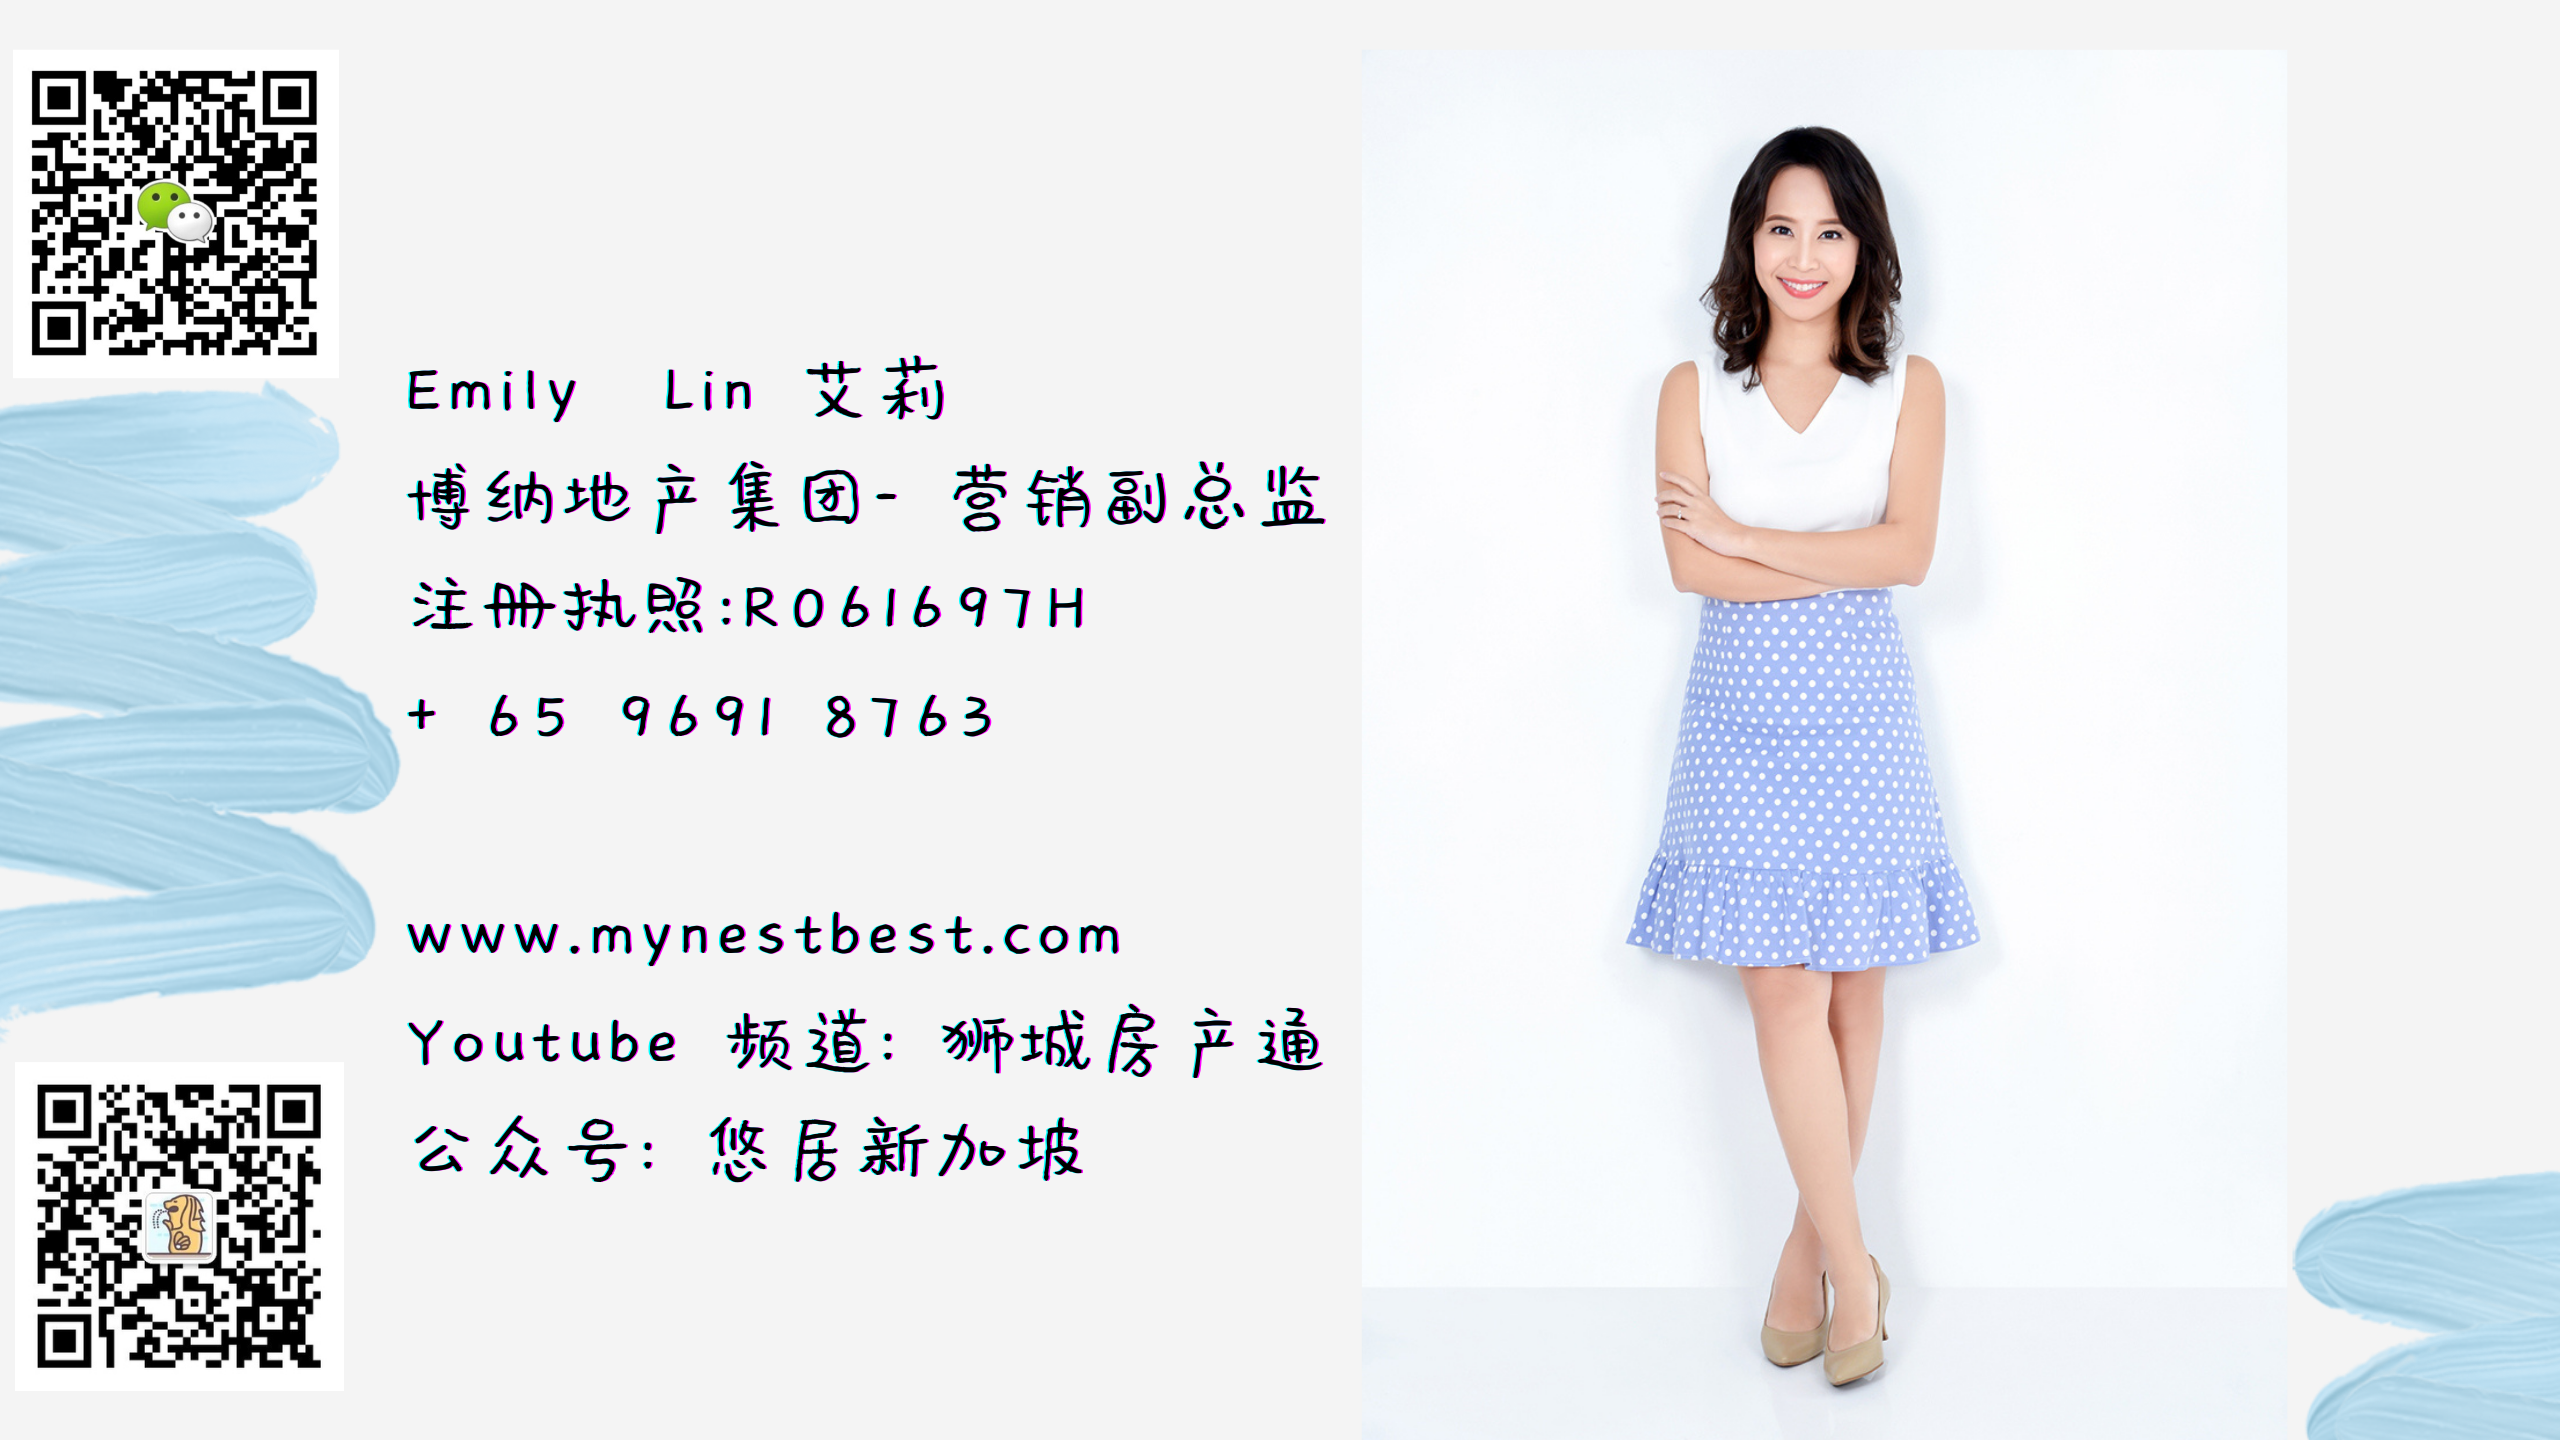 Profile with Wechat QR code.png